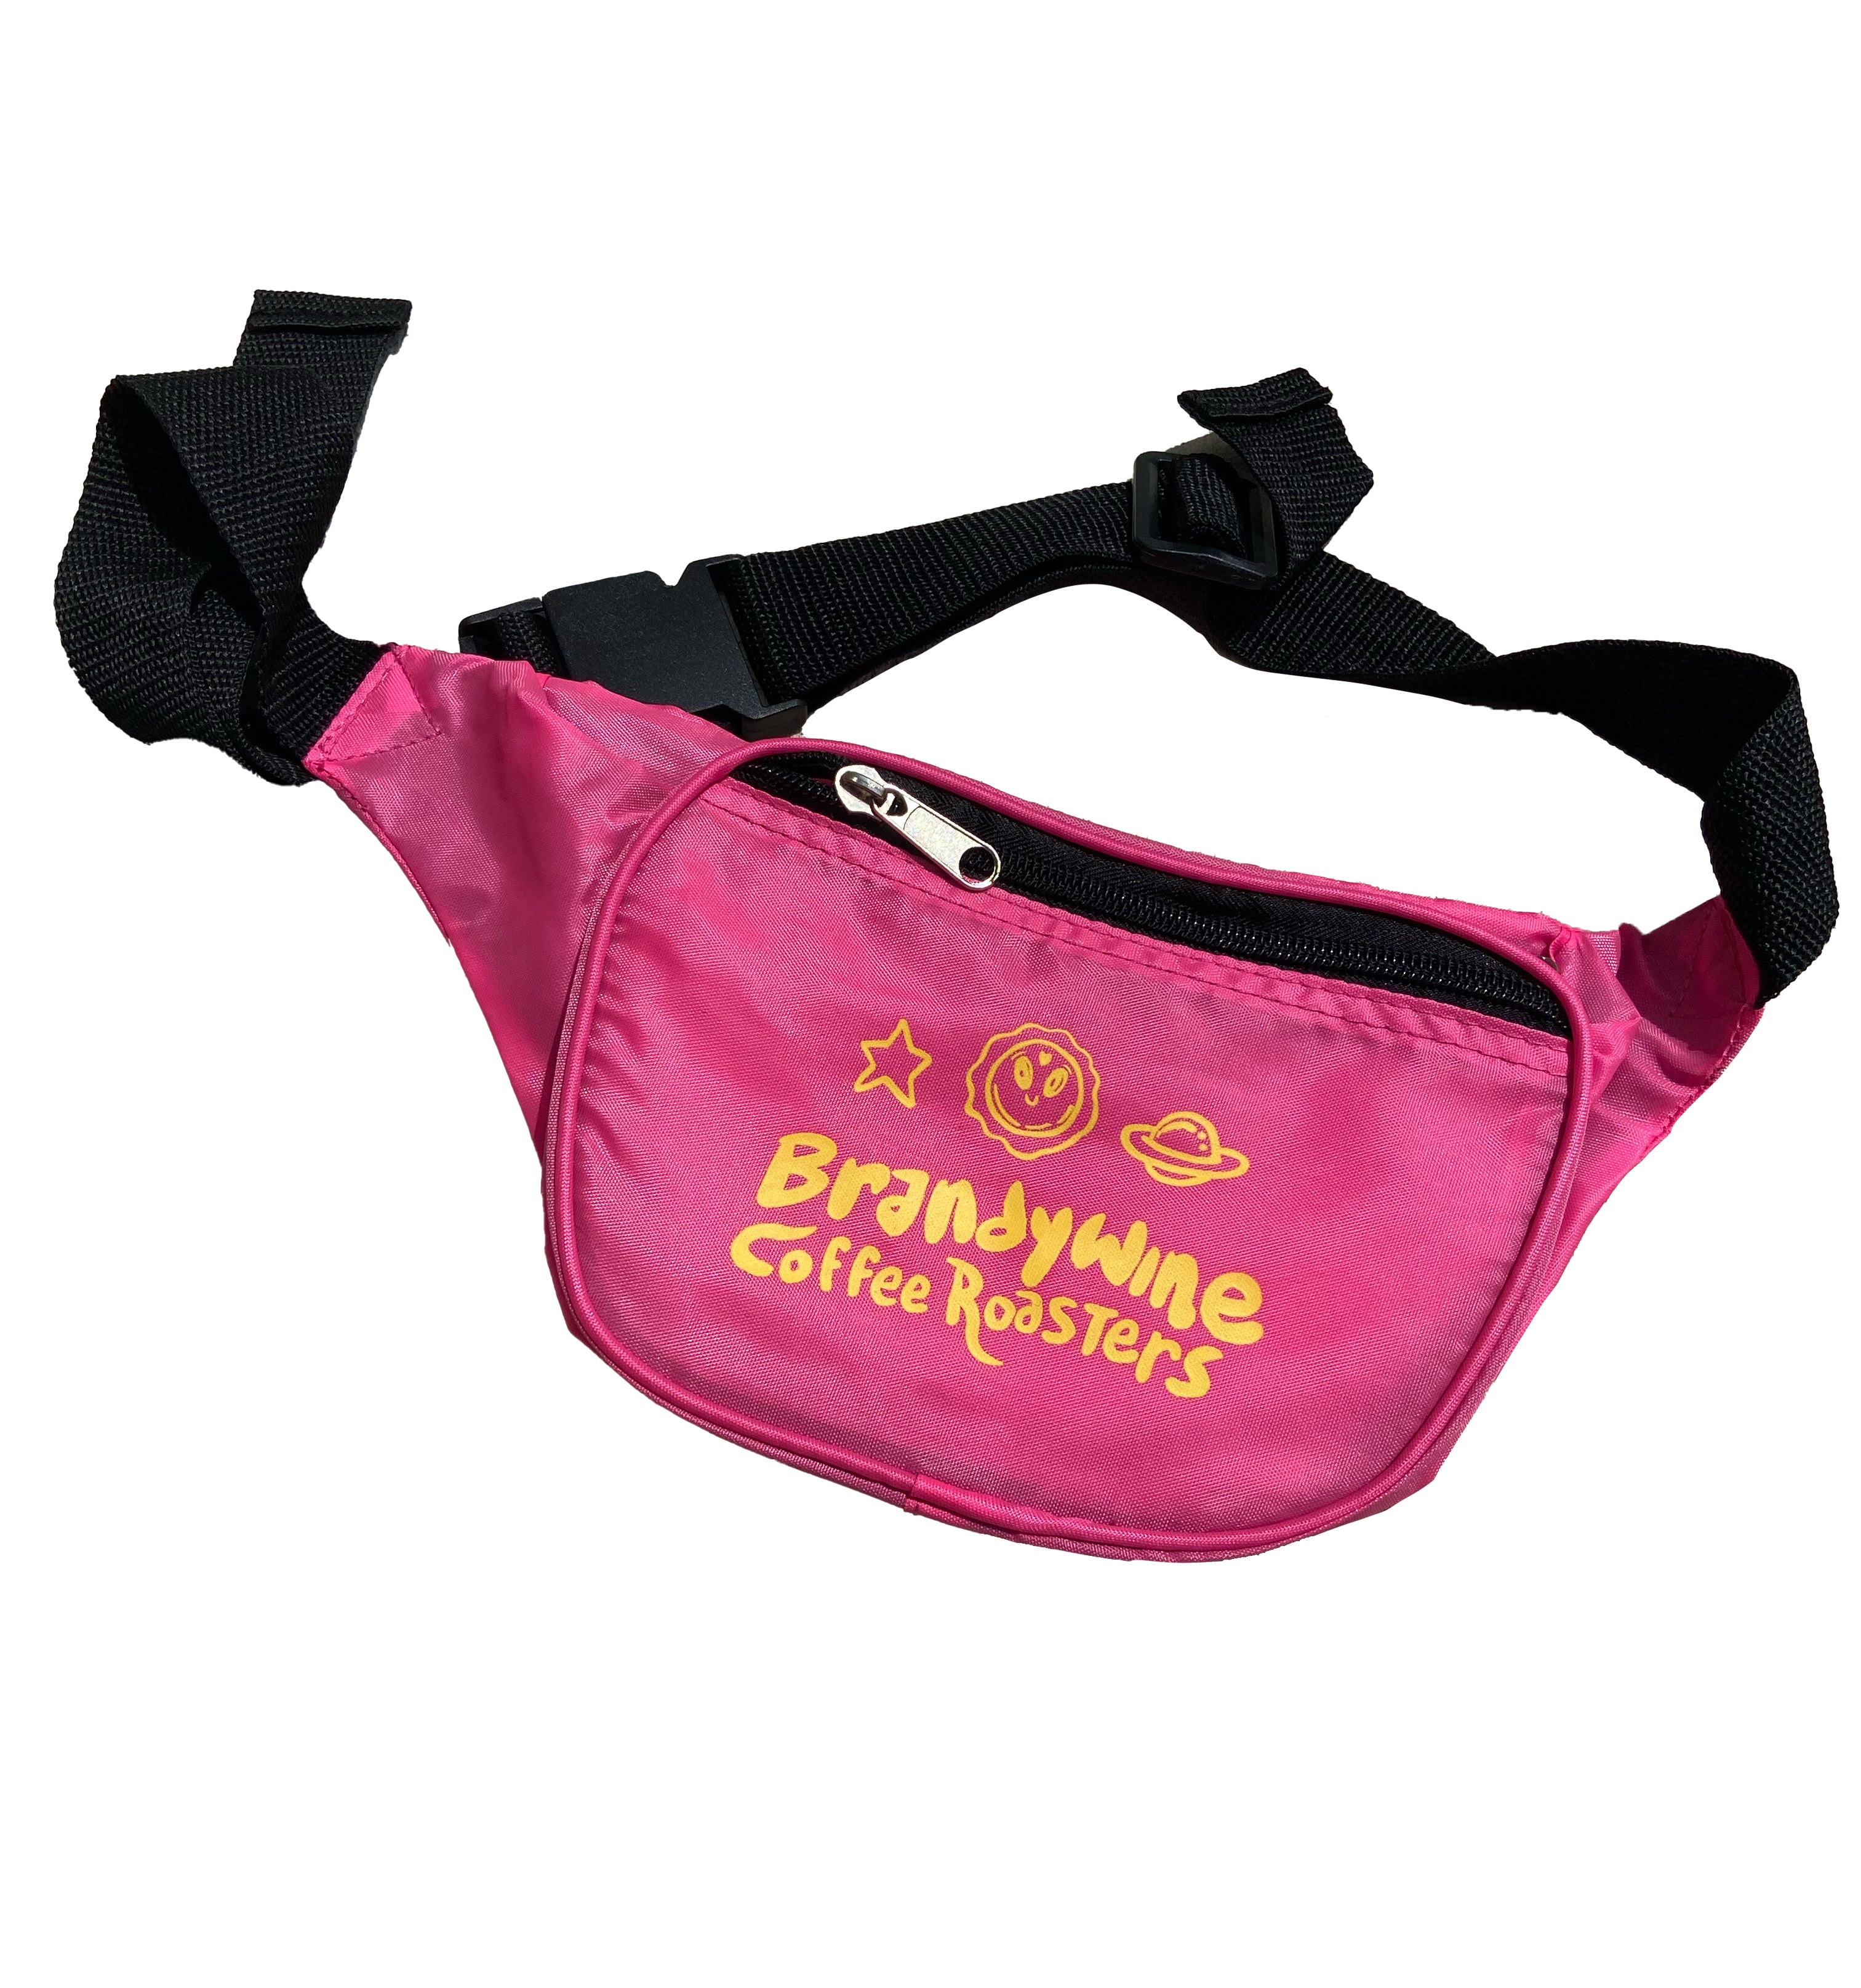 Pretty Pink Fanny Pack!